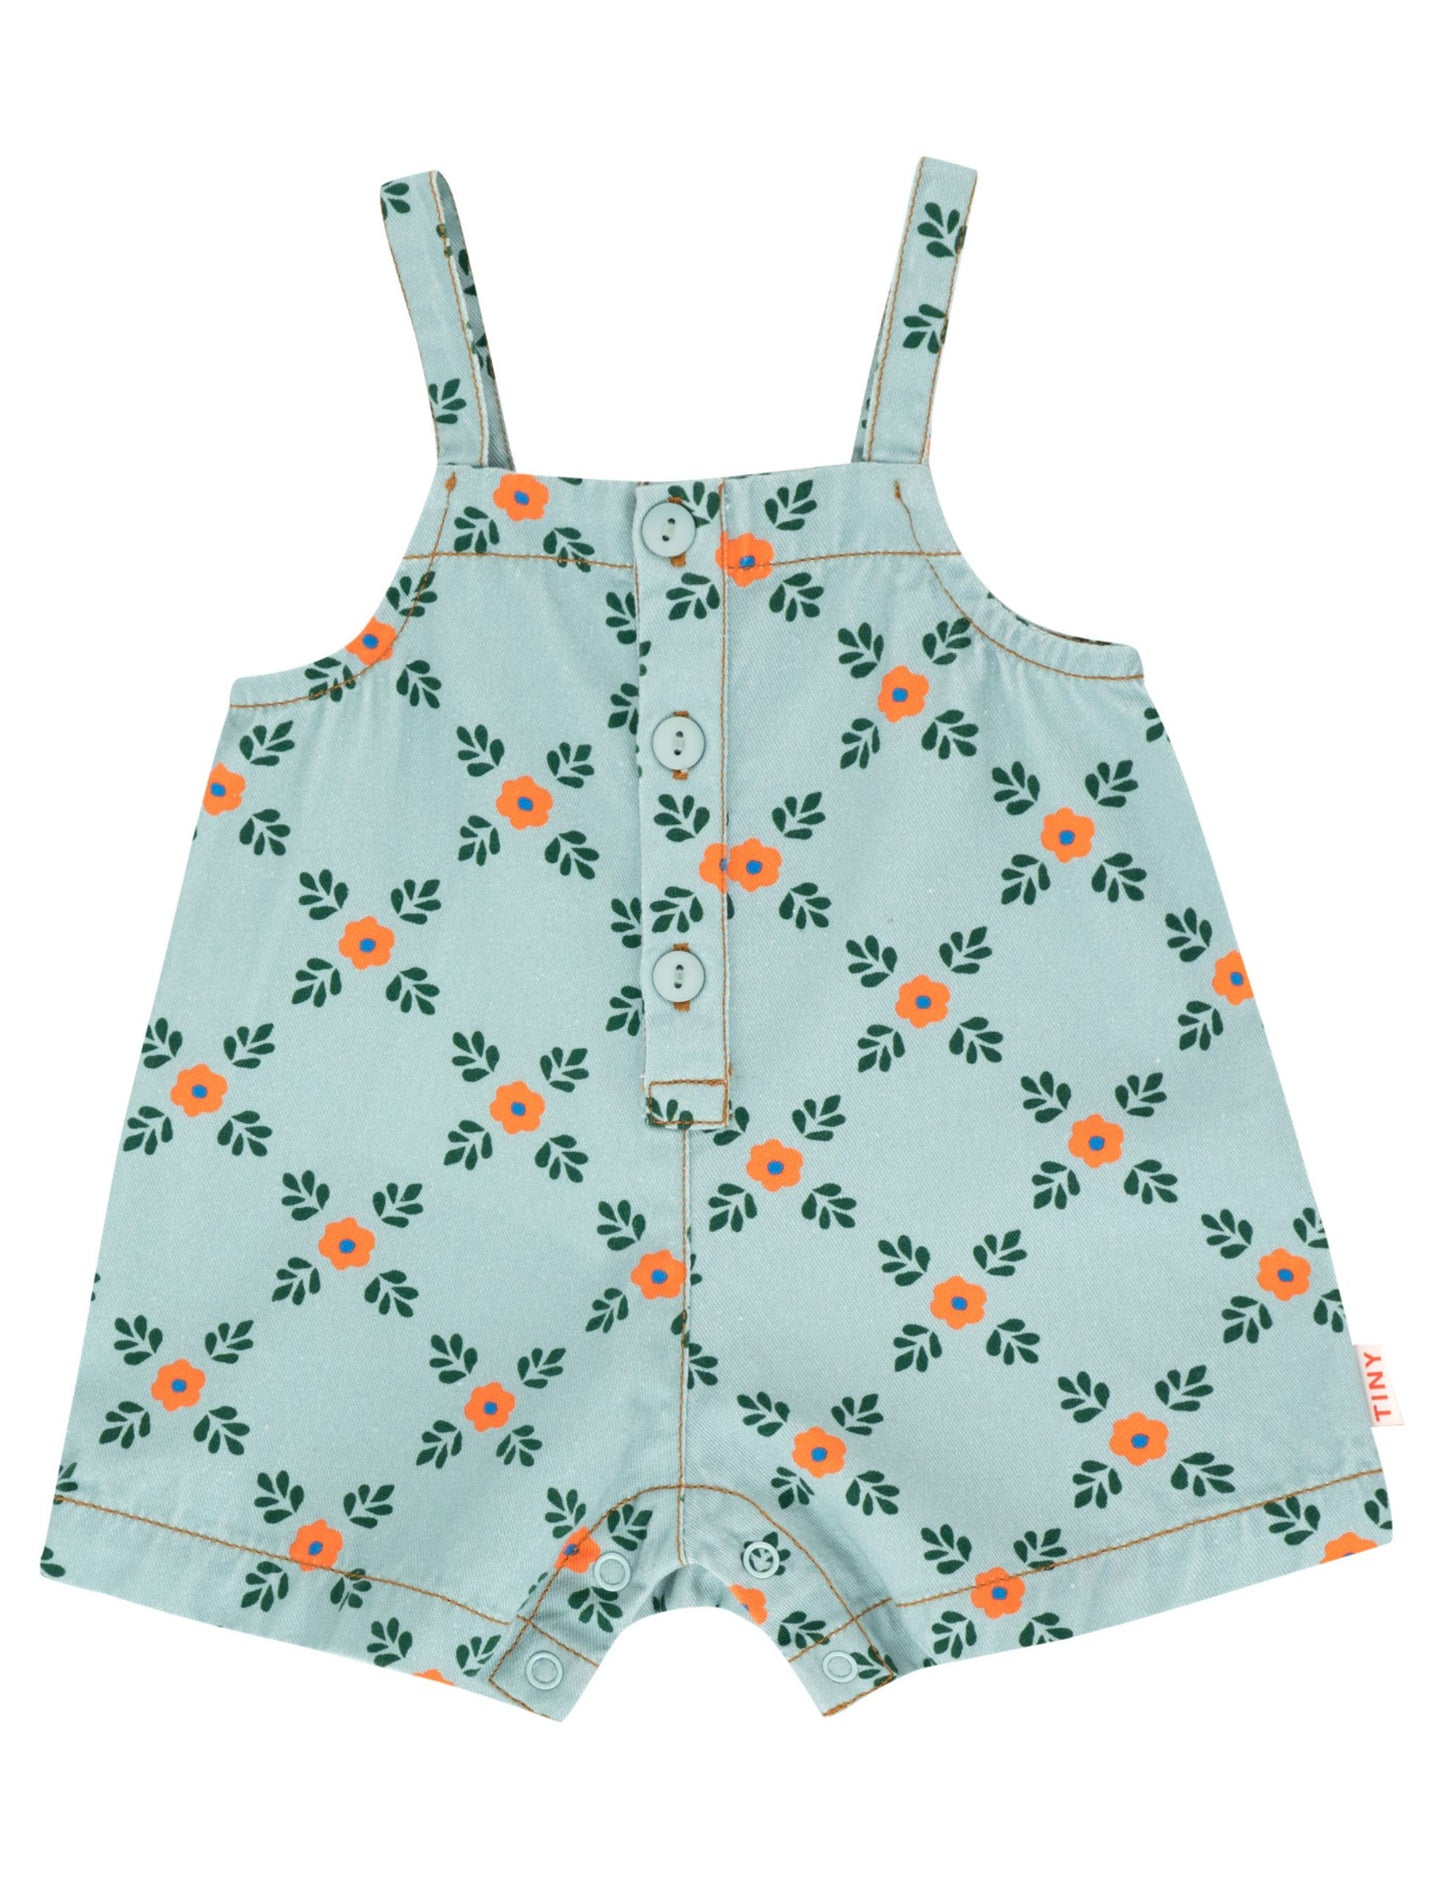 Folklore baby dungaree